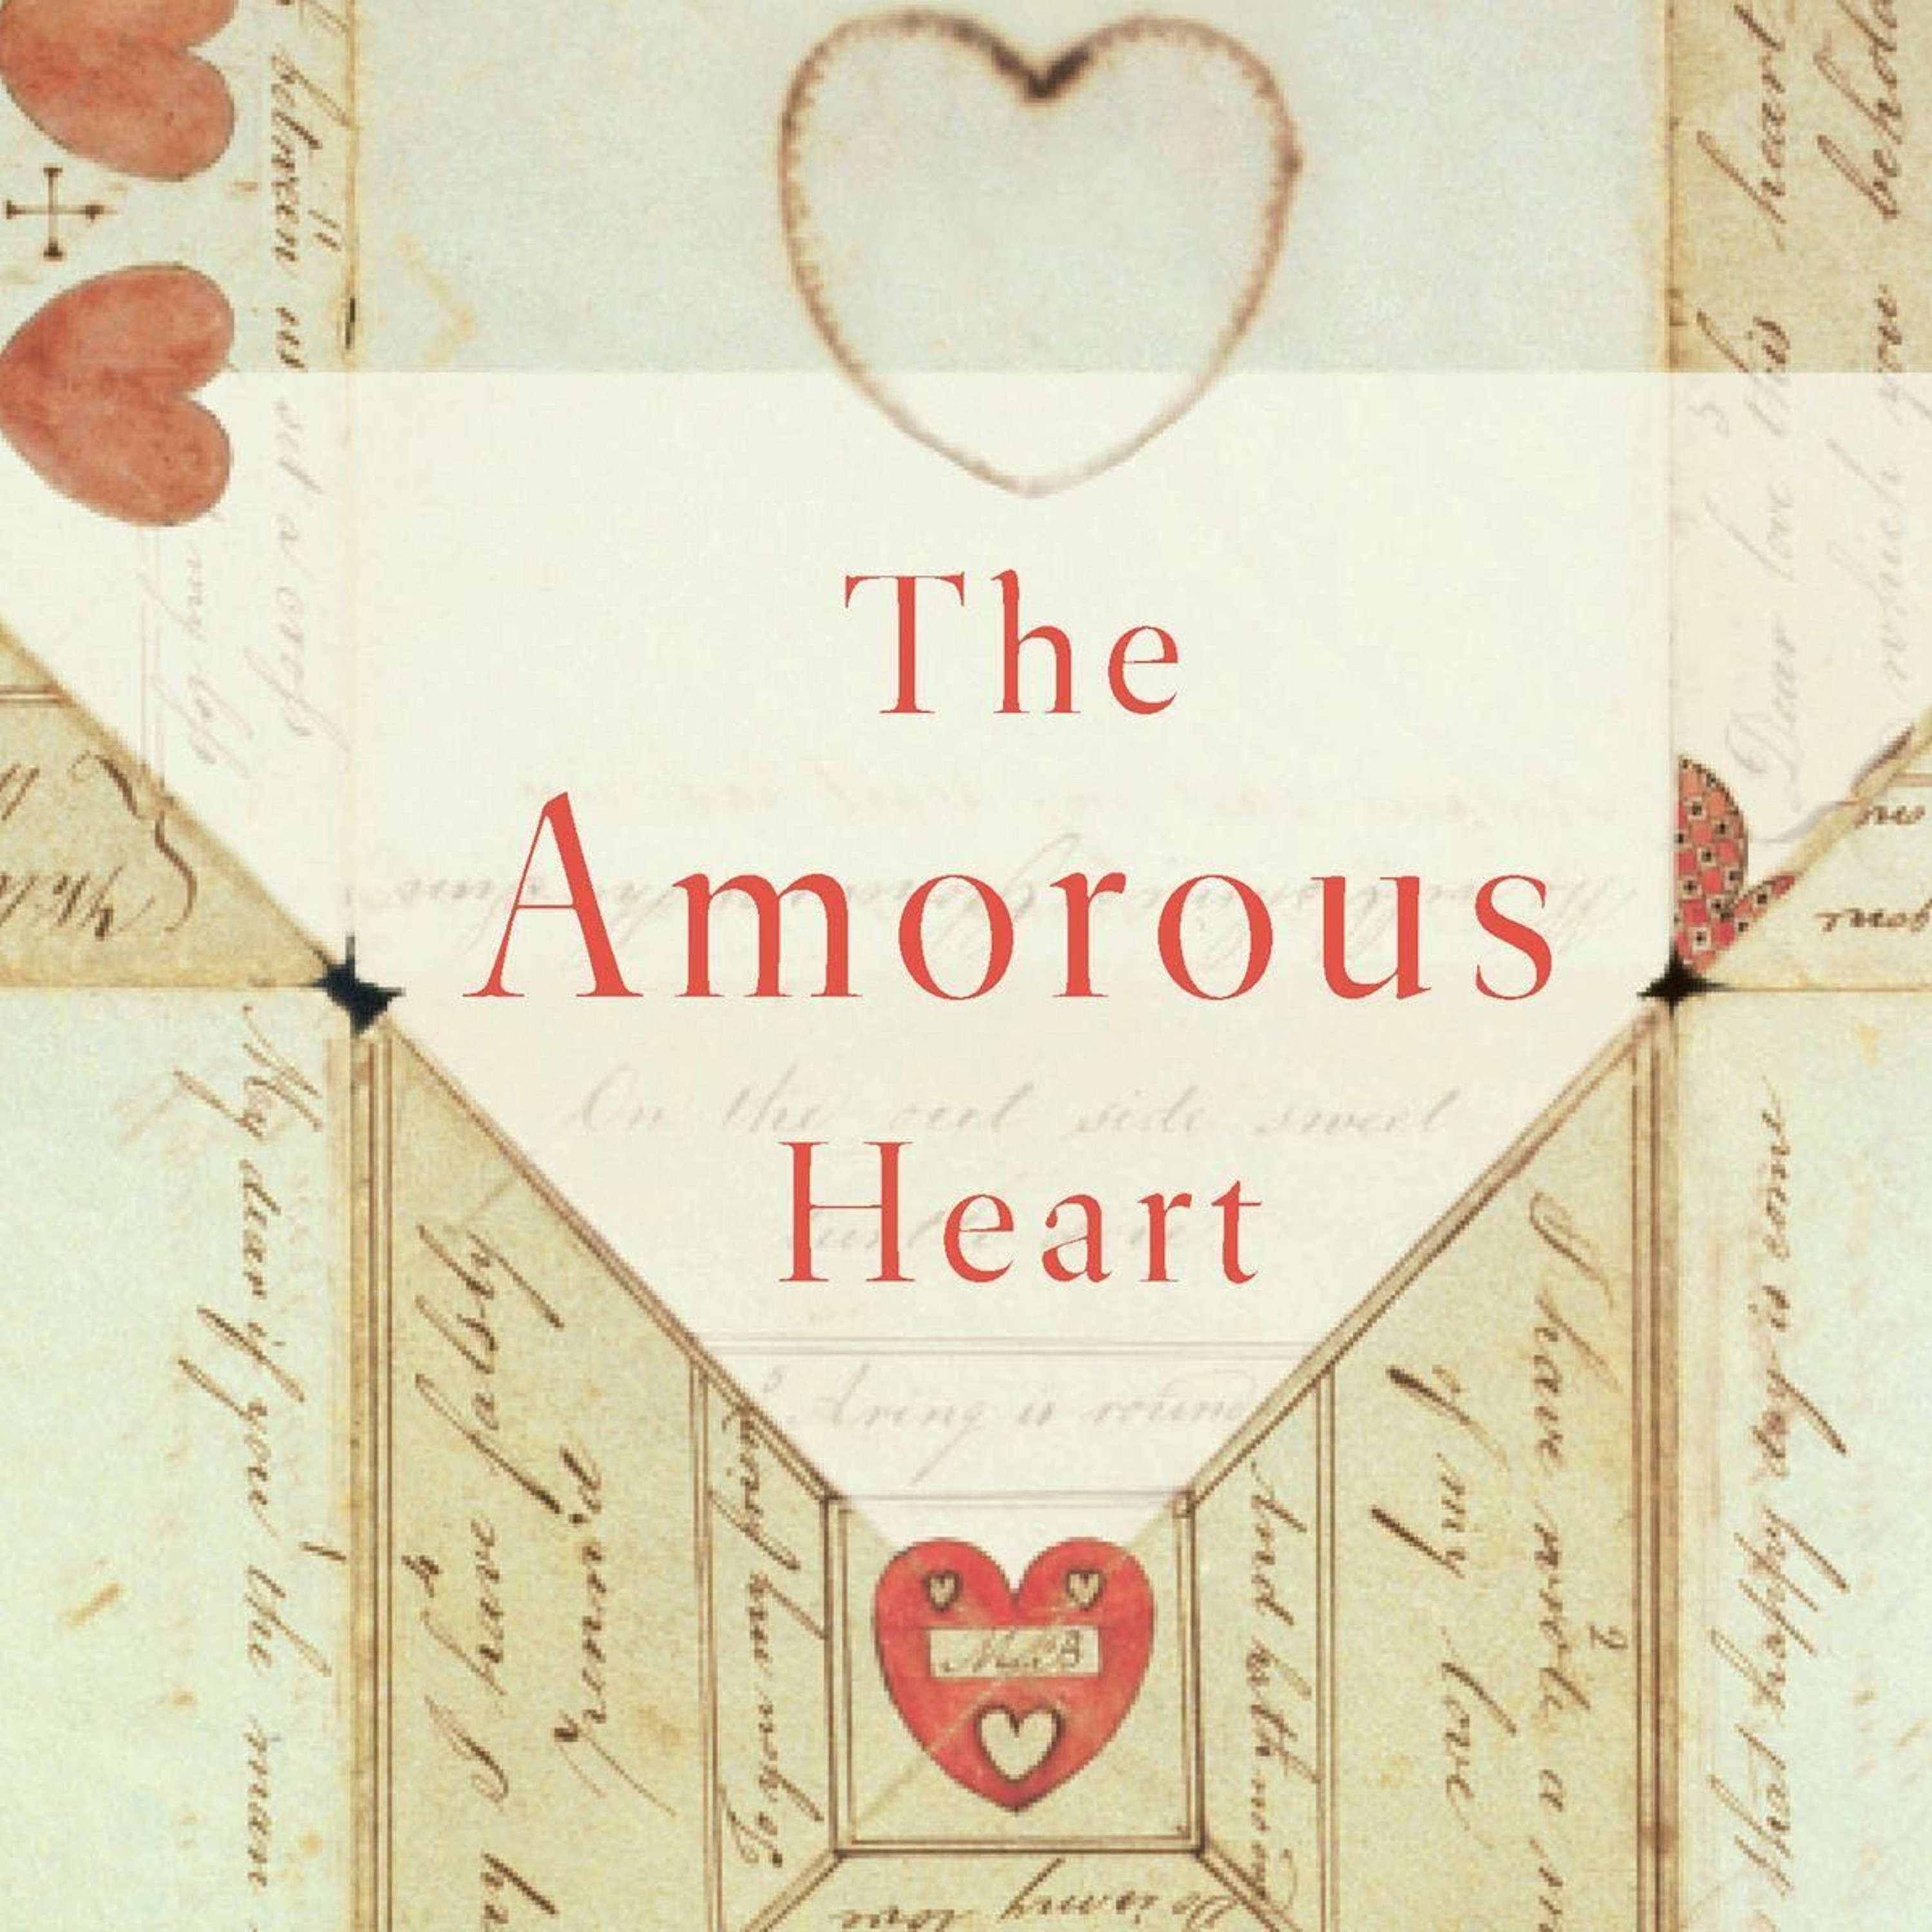 Marilyn Yalom, “The Amorous Heart: An Unconventional History of Love”